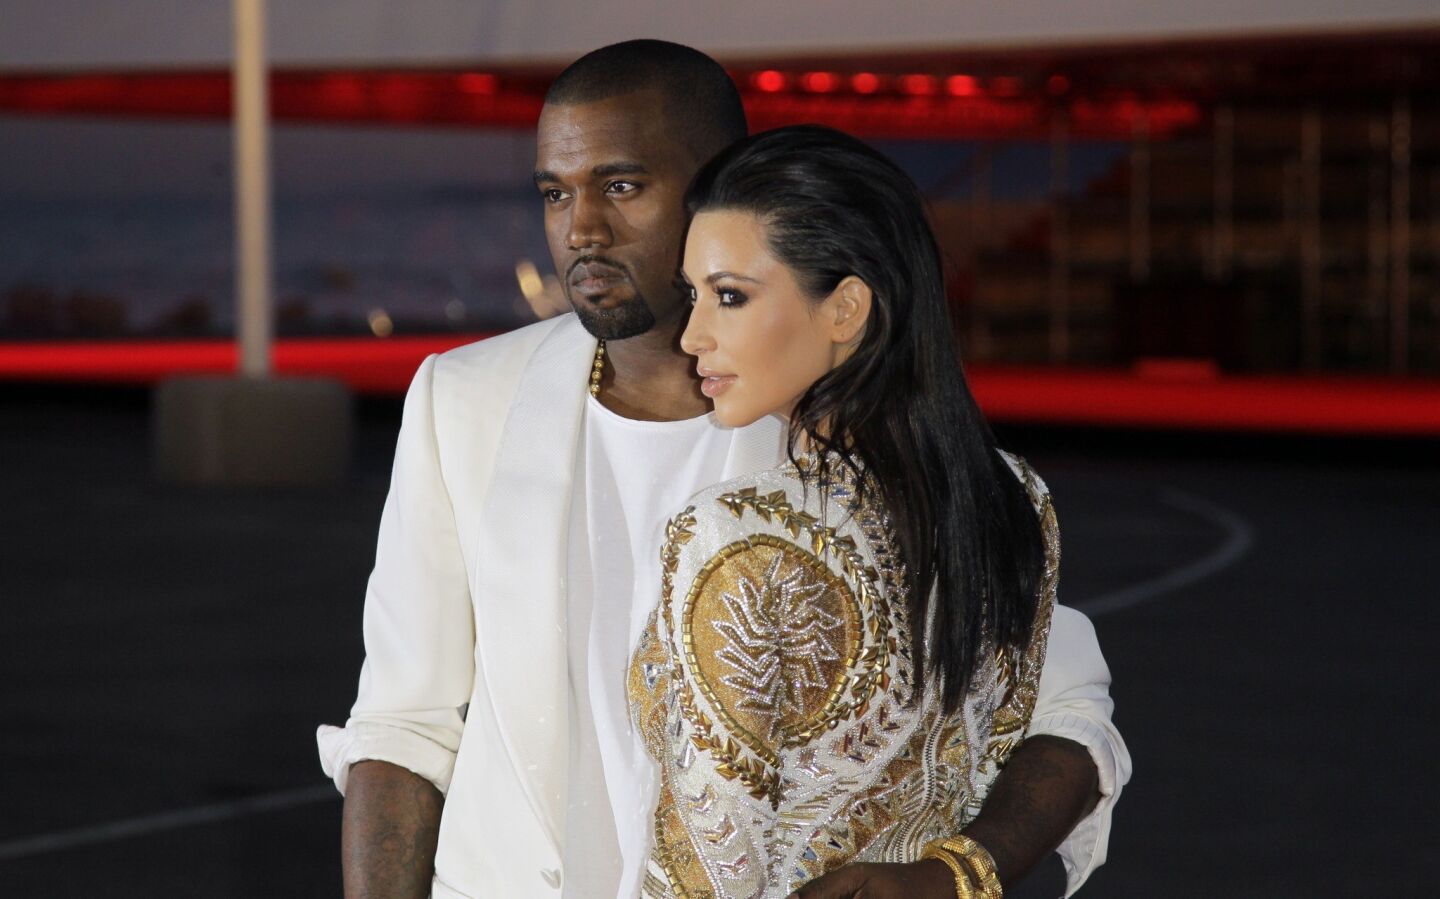 Singer Kanye West and his girlfriend, Kim Kardashian, arrive for the screening of "Cruel Summer" at the Cannes Film Festival on May 23, 2012.